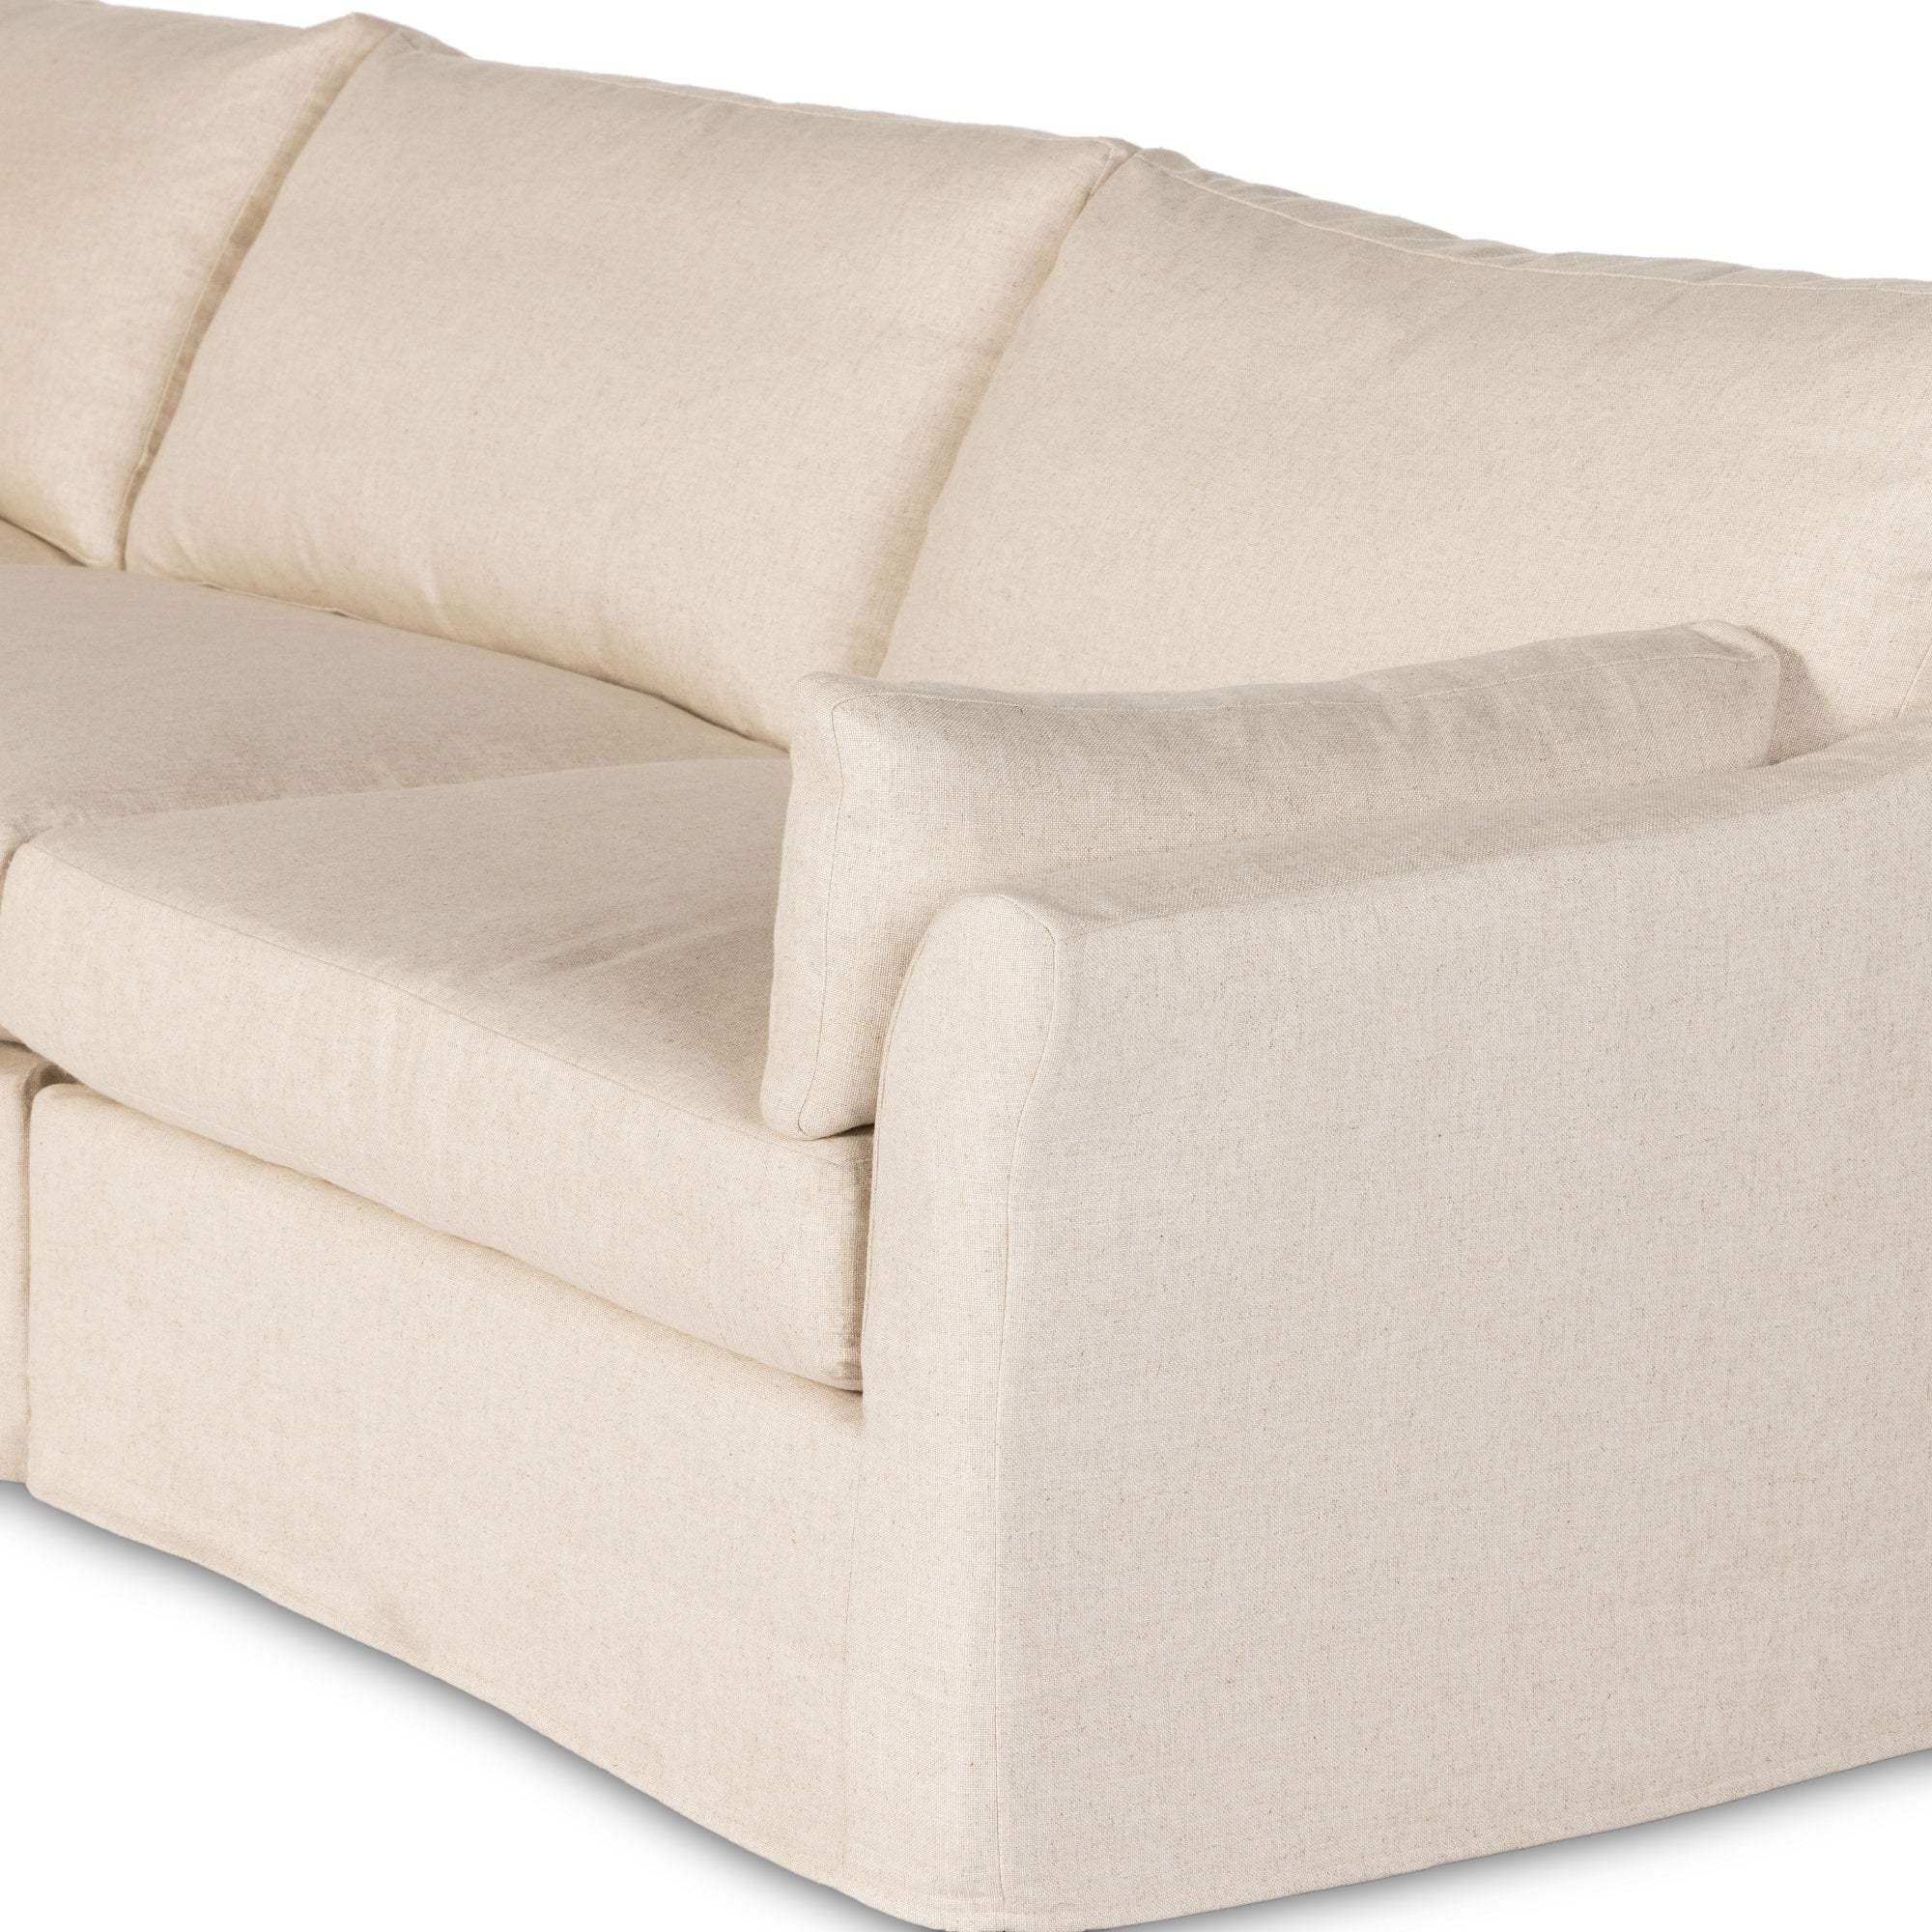 Delray 5pc Slipcover Sectional